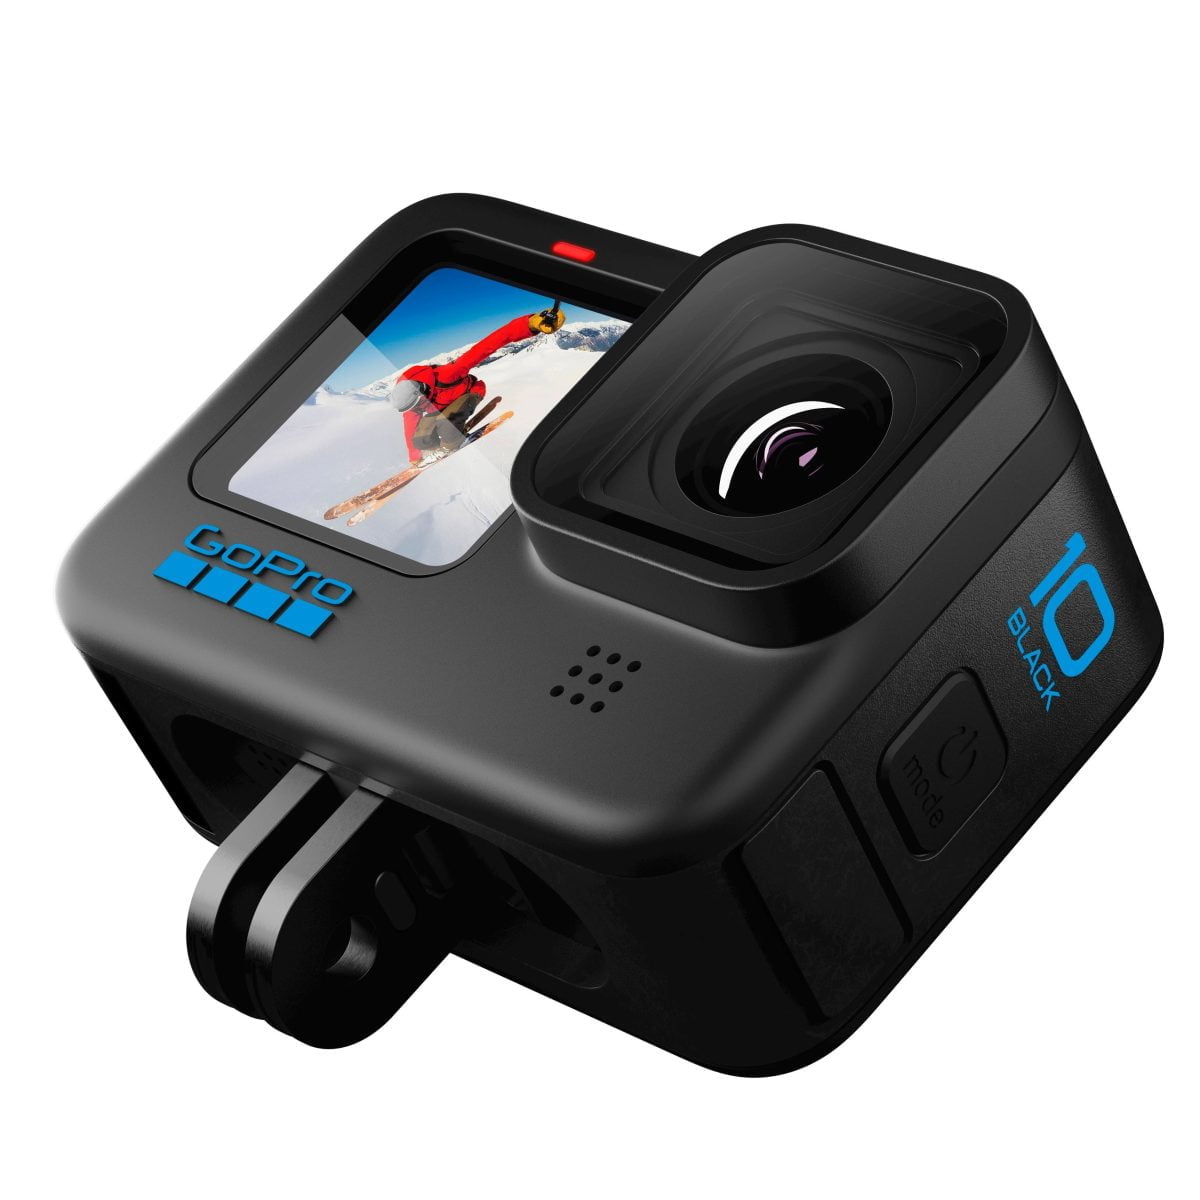 6474501Cv14D Scaled Gopro &Lt;H1&Gt;Gopro Hero10 Action Camera Black (Stabilization Hyper Smooth 4.0)&Lt;/H1&Gt; Https://Www.youtube.com/Watch?V=Jgmiyzcpnse Capture Quality Vlogs With This Black Gopro Hero10 Camera. The Removable Rechargeable 1720 Mah Battery Offers Long Shooting Periods, While The Rugged, Waterproof Design Allows Flexible Use On Different Terrains. This Gopro Hero10 Camera Features A 1.4-Inch Screen For Framing Shots Seamlessly, And The 23Mp Sensor Captures 5.3K Videos Effortlessly. Gopro Hero10 Gopro Hero10 Action Camera Black